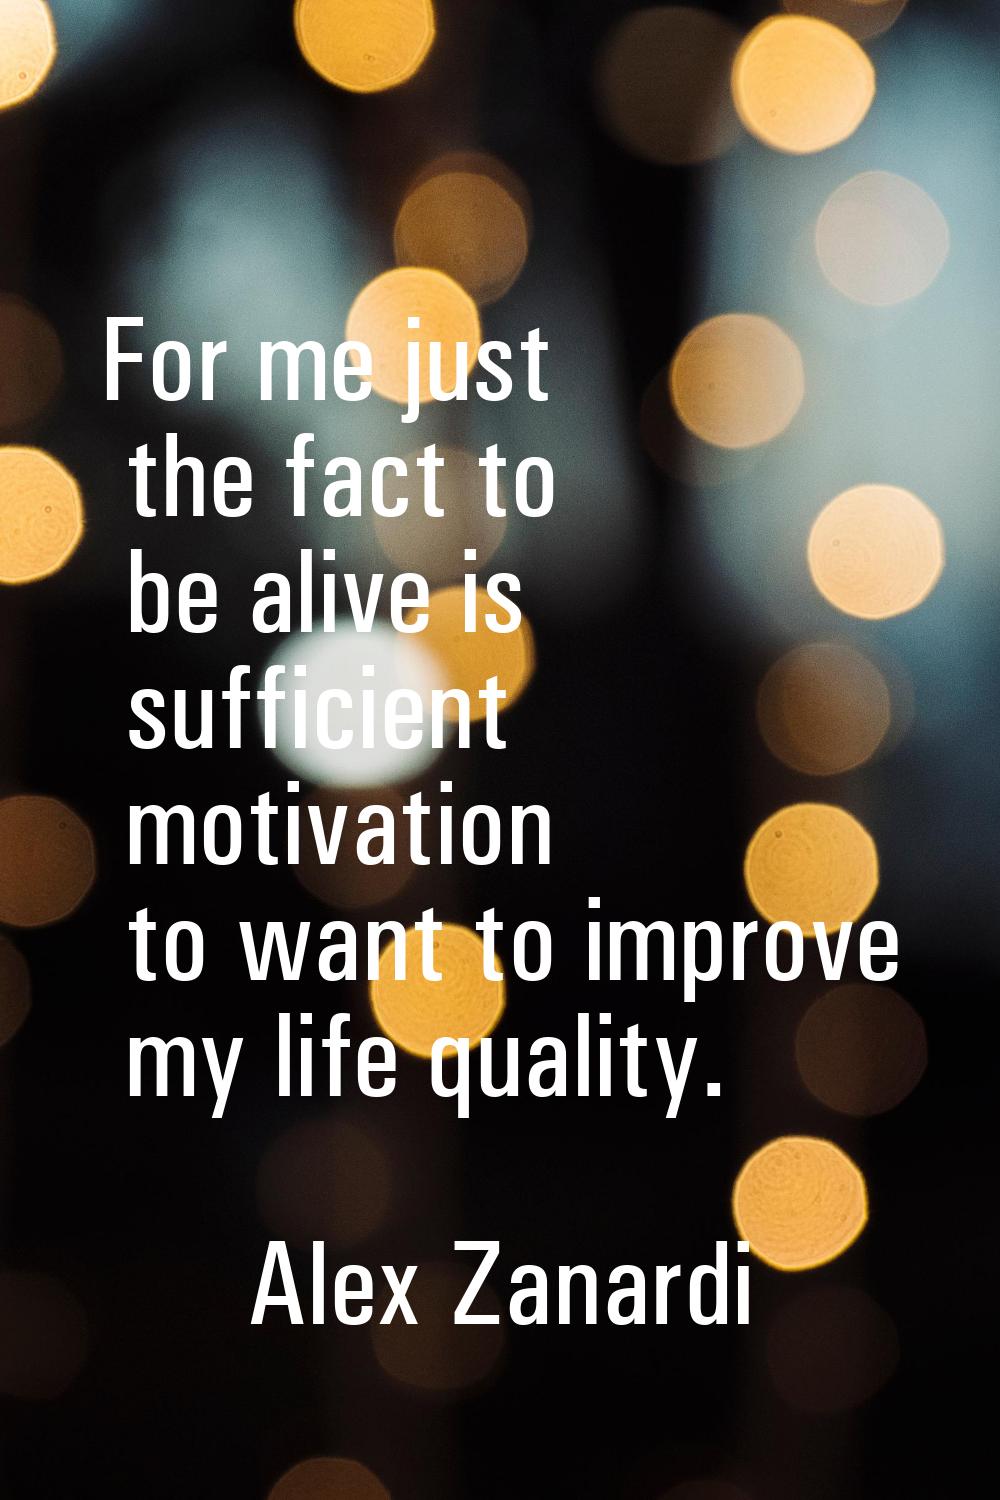 For me just the fact to be alive is sufficient motivation to want to improve my life quality.